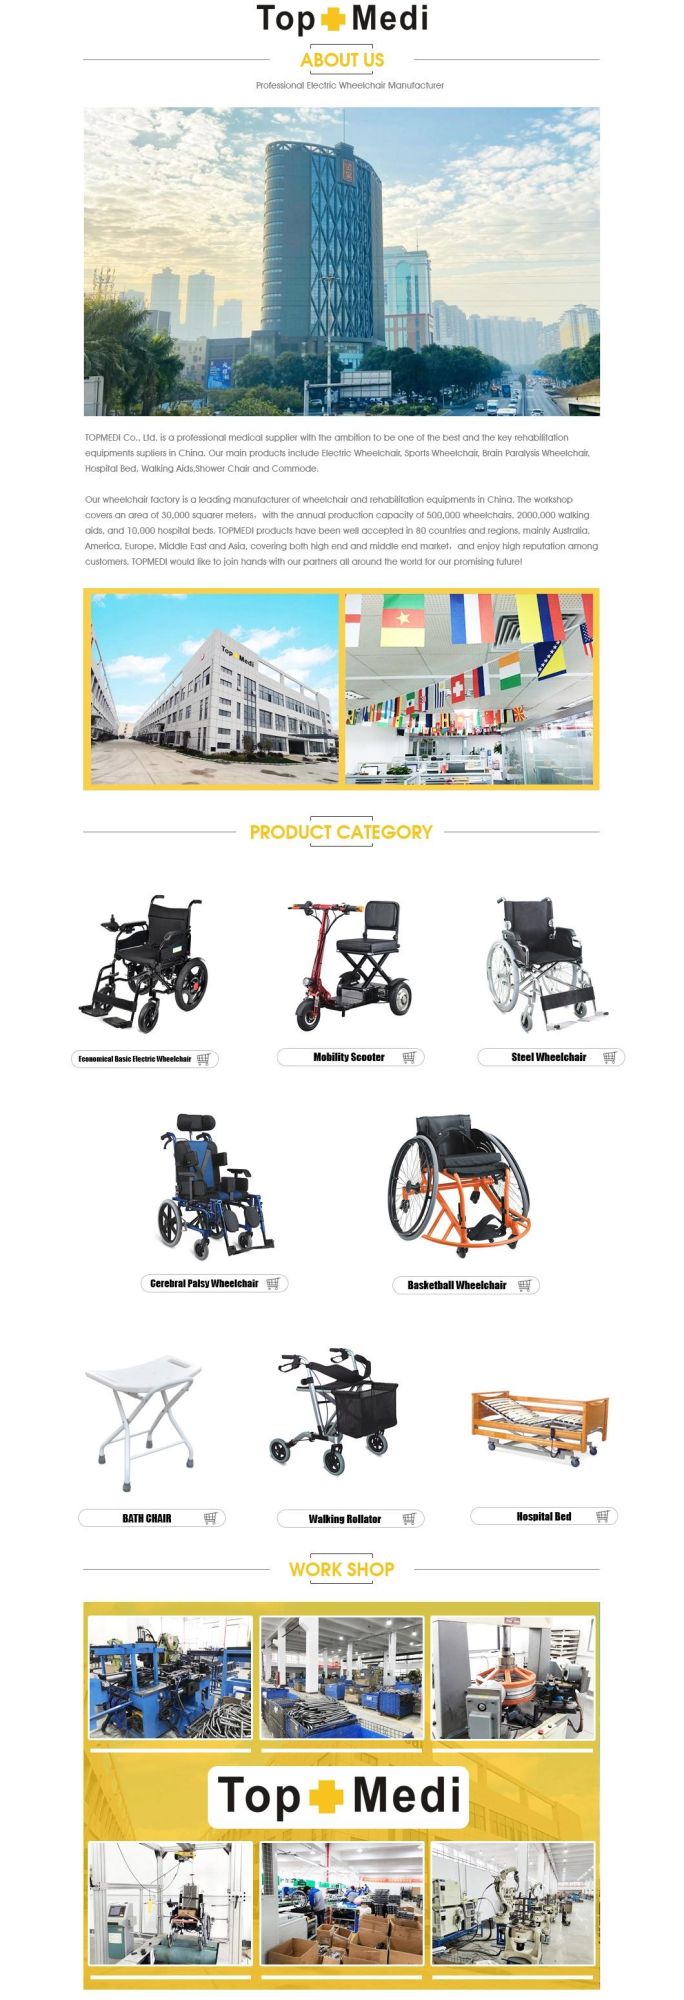 High Quality Lightweight Portable Electric Wheelchair with Long Distance